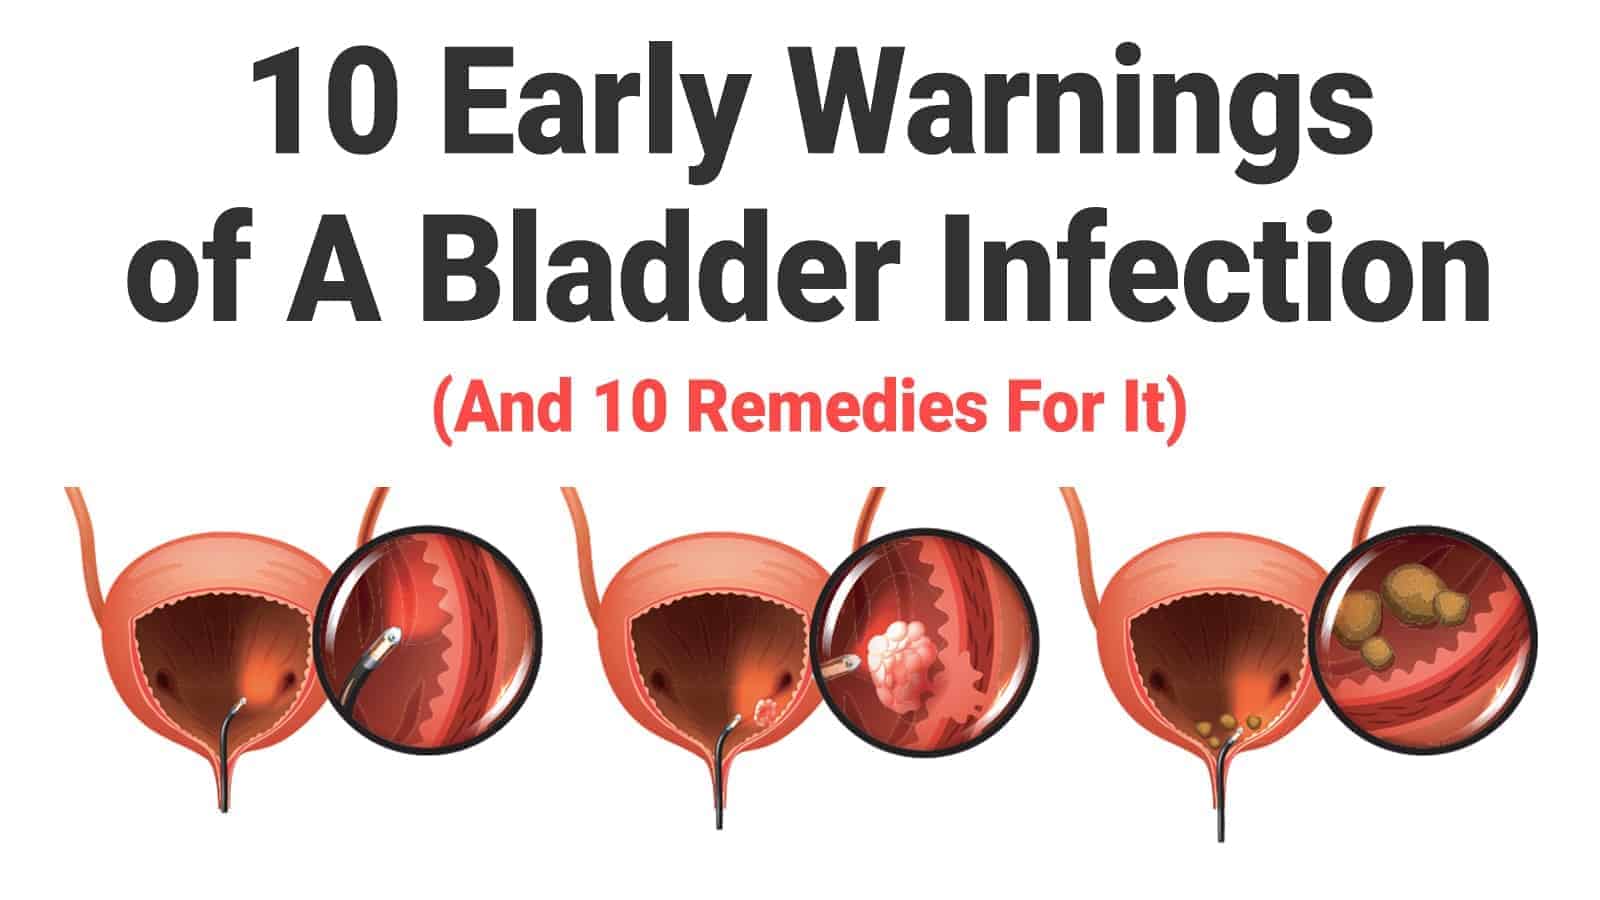 10 Early Warnings of A Bladder Infection (And 10 Remedies For It)